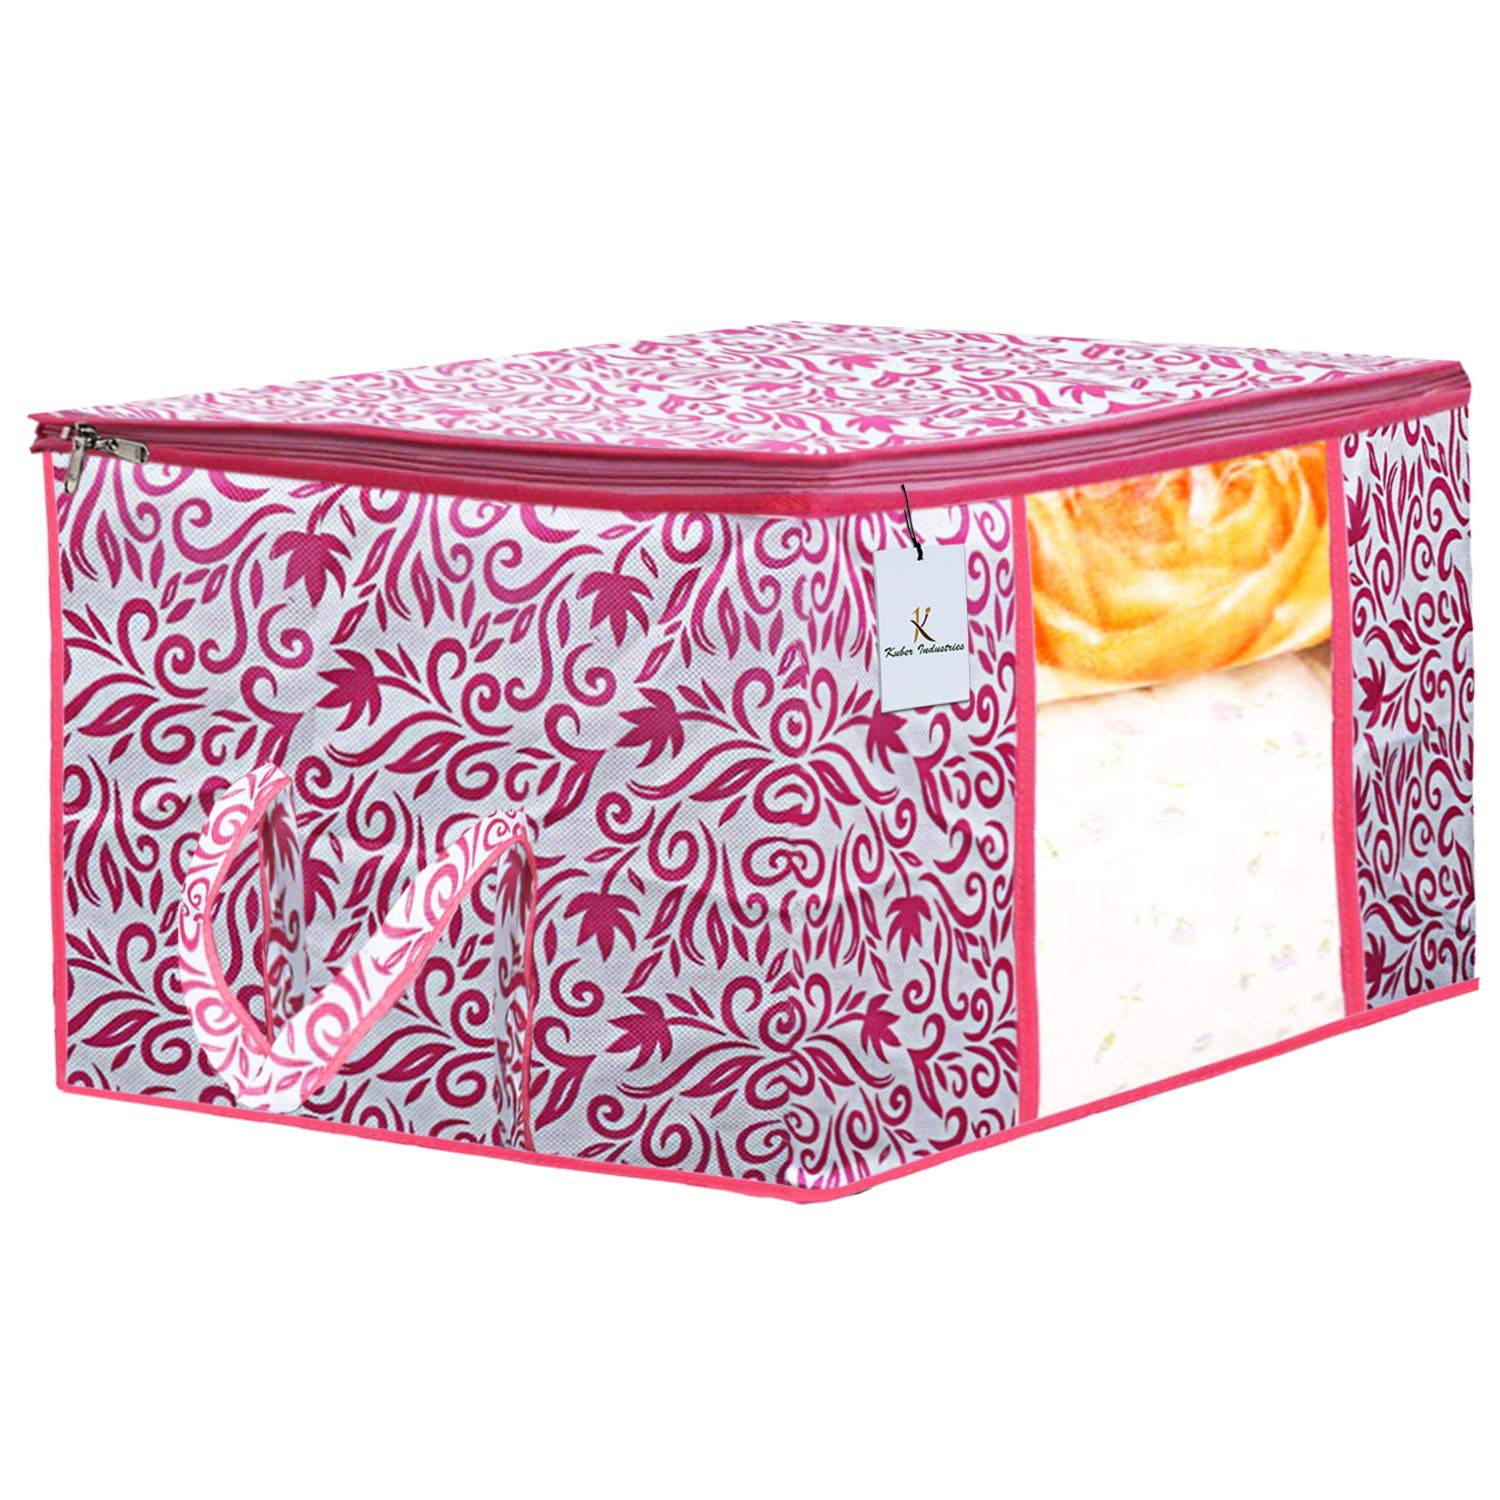 Kuber Industries Leaf DesignNon Woven Saree Cover And Underbed Storage Bag, Storage Organiser, Blanket Cover, Red & Pink  -CTKTC42369